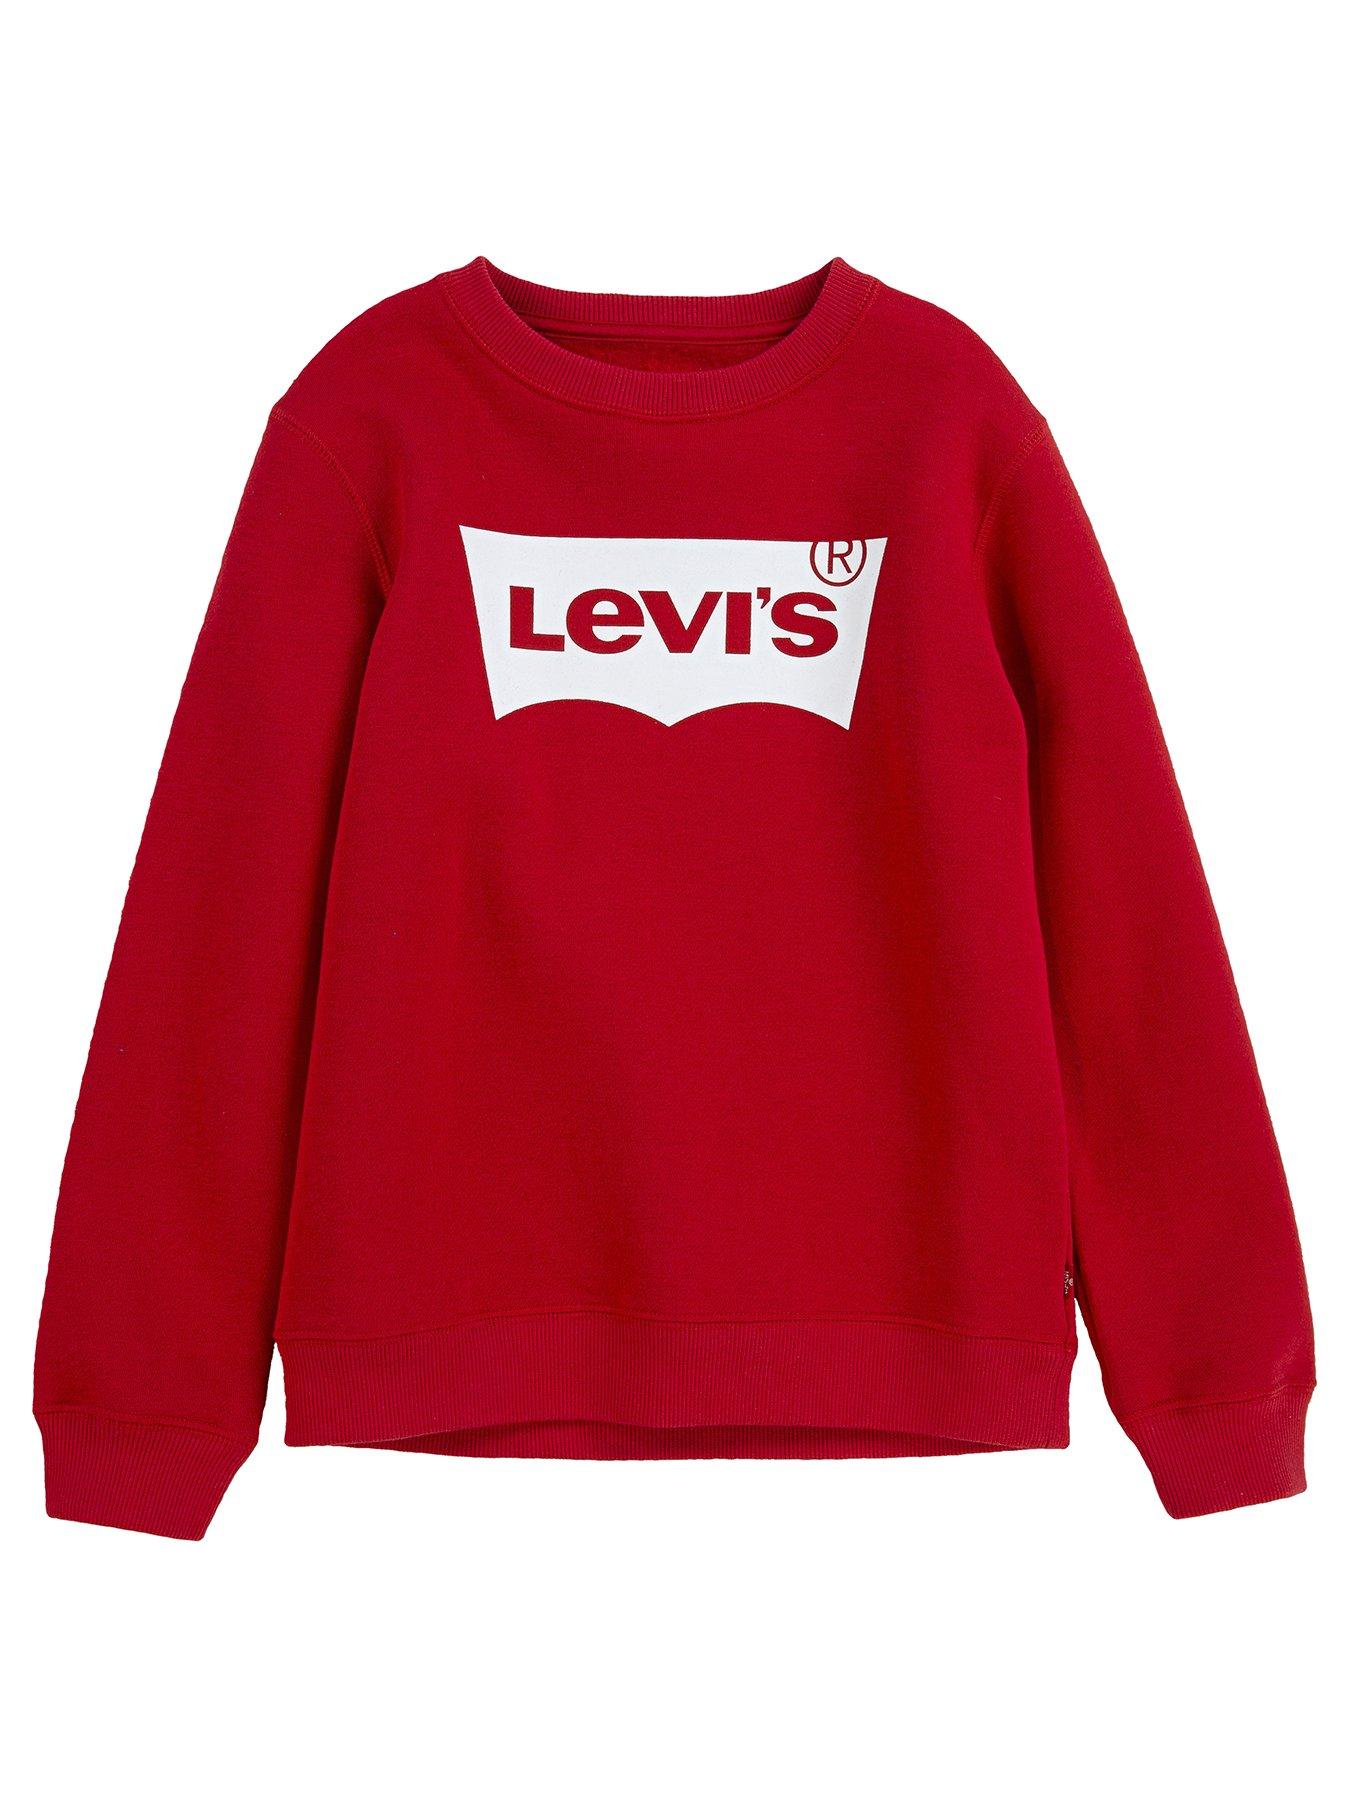 Boys Clothes Boys Batwing Crew Neck Sweat Top - Red